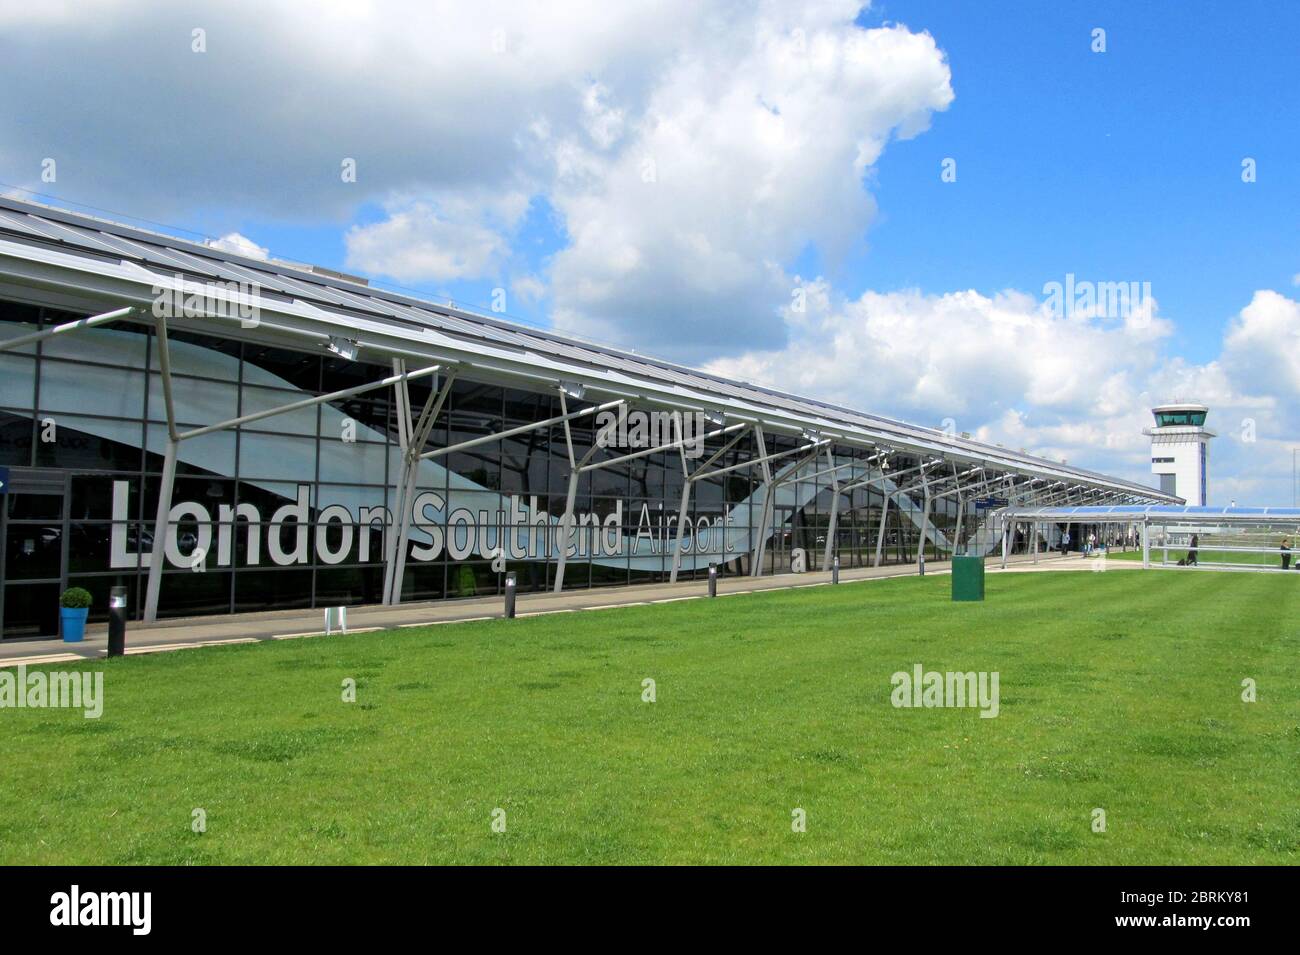 London Southend Airport new terminal building Stock Photo